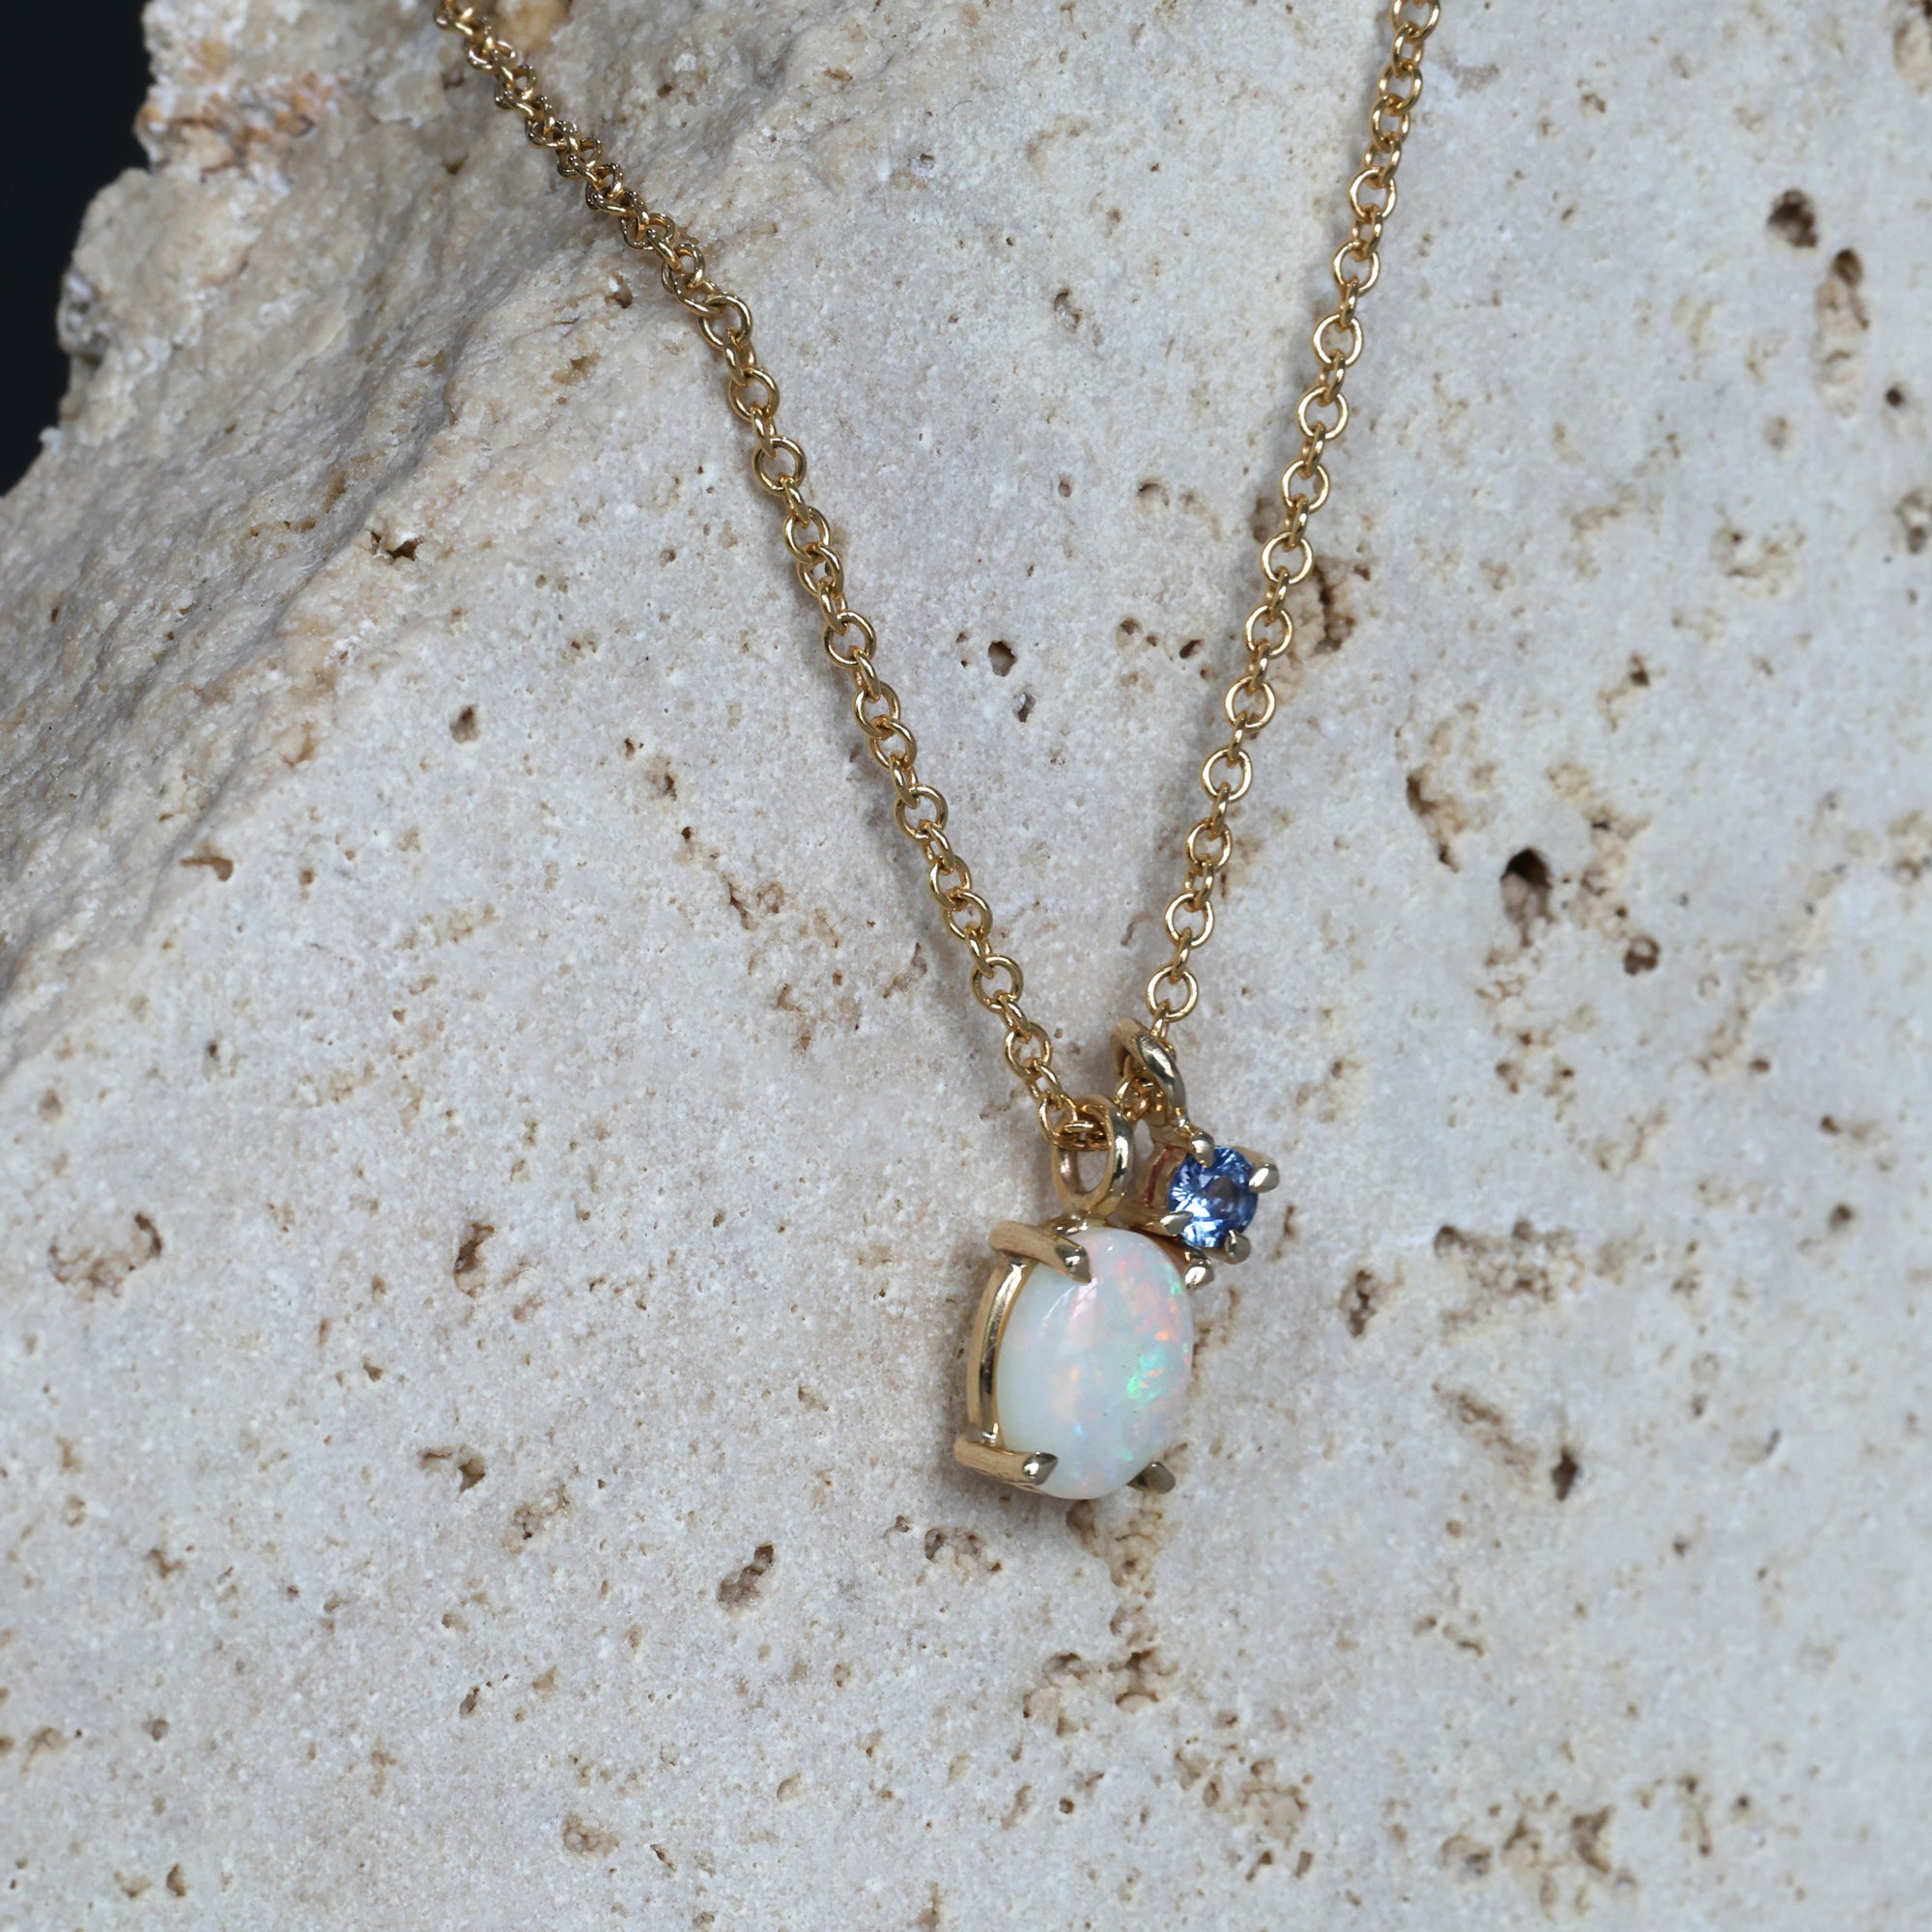 Buy Blue Opal Necklace, Initial Locket, Letter Locket, Necklace, Gift for  Friend, Fire Opal Necklace, Anniversary Gift Online in India - Etsy